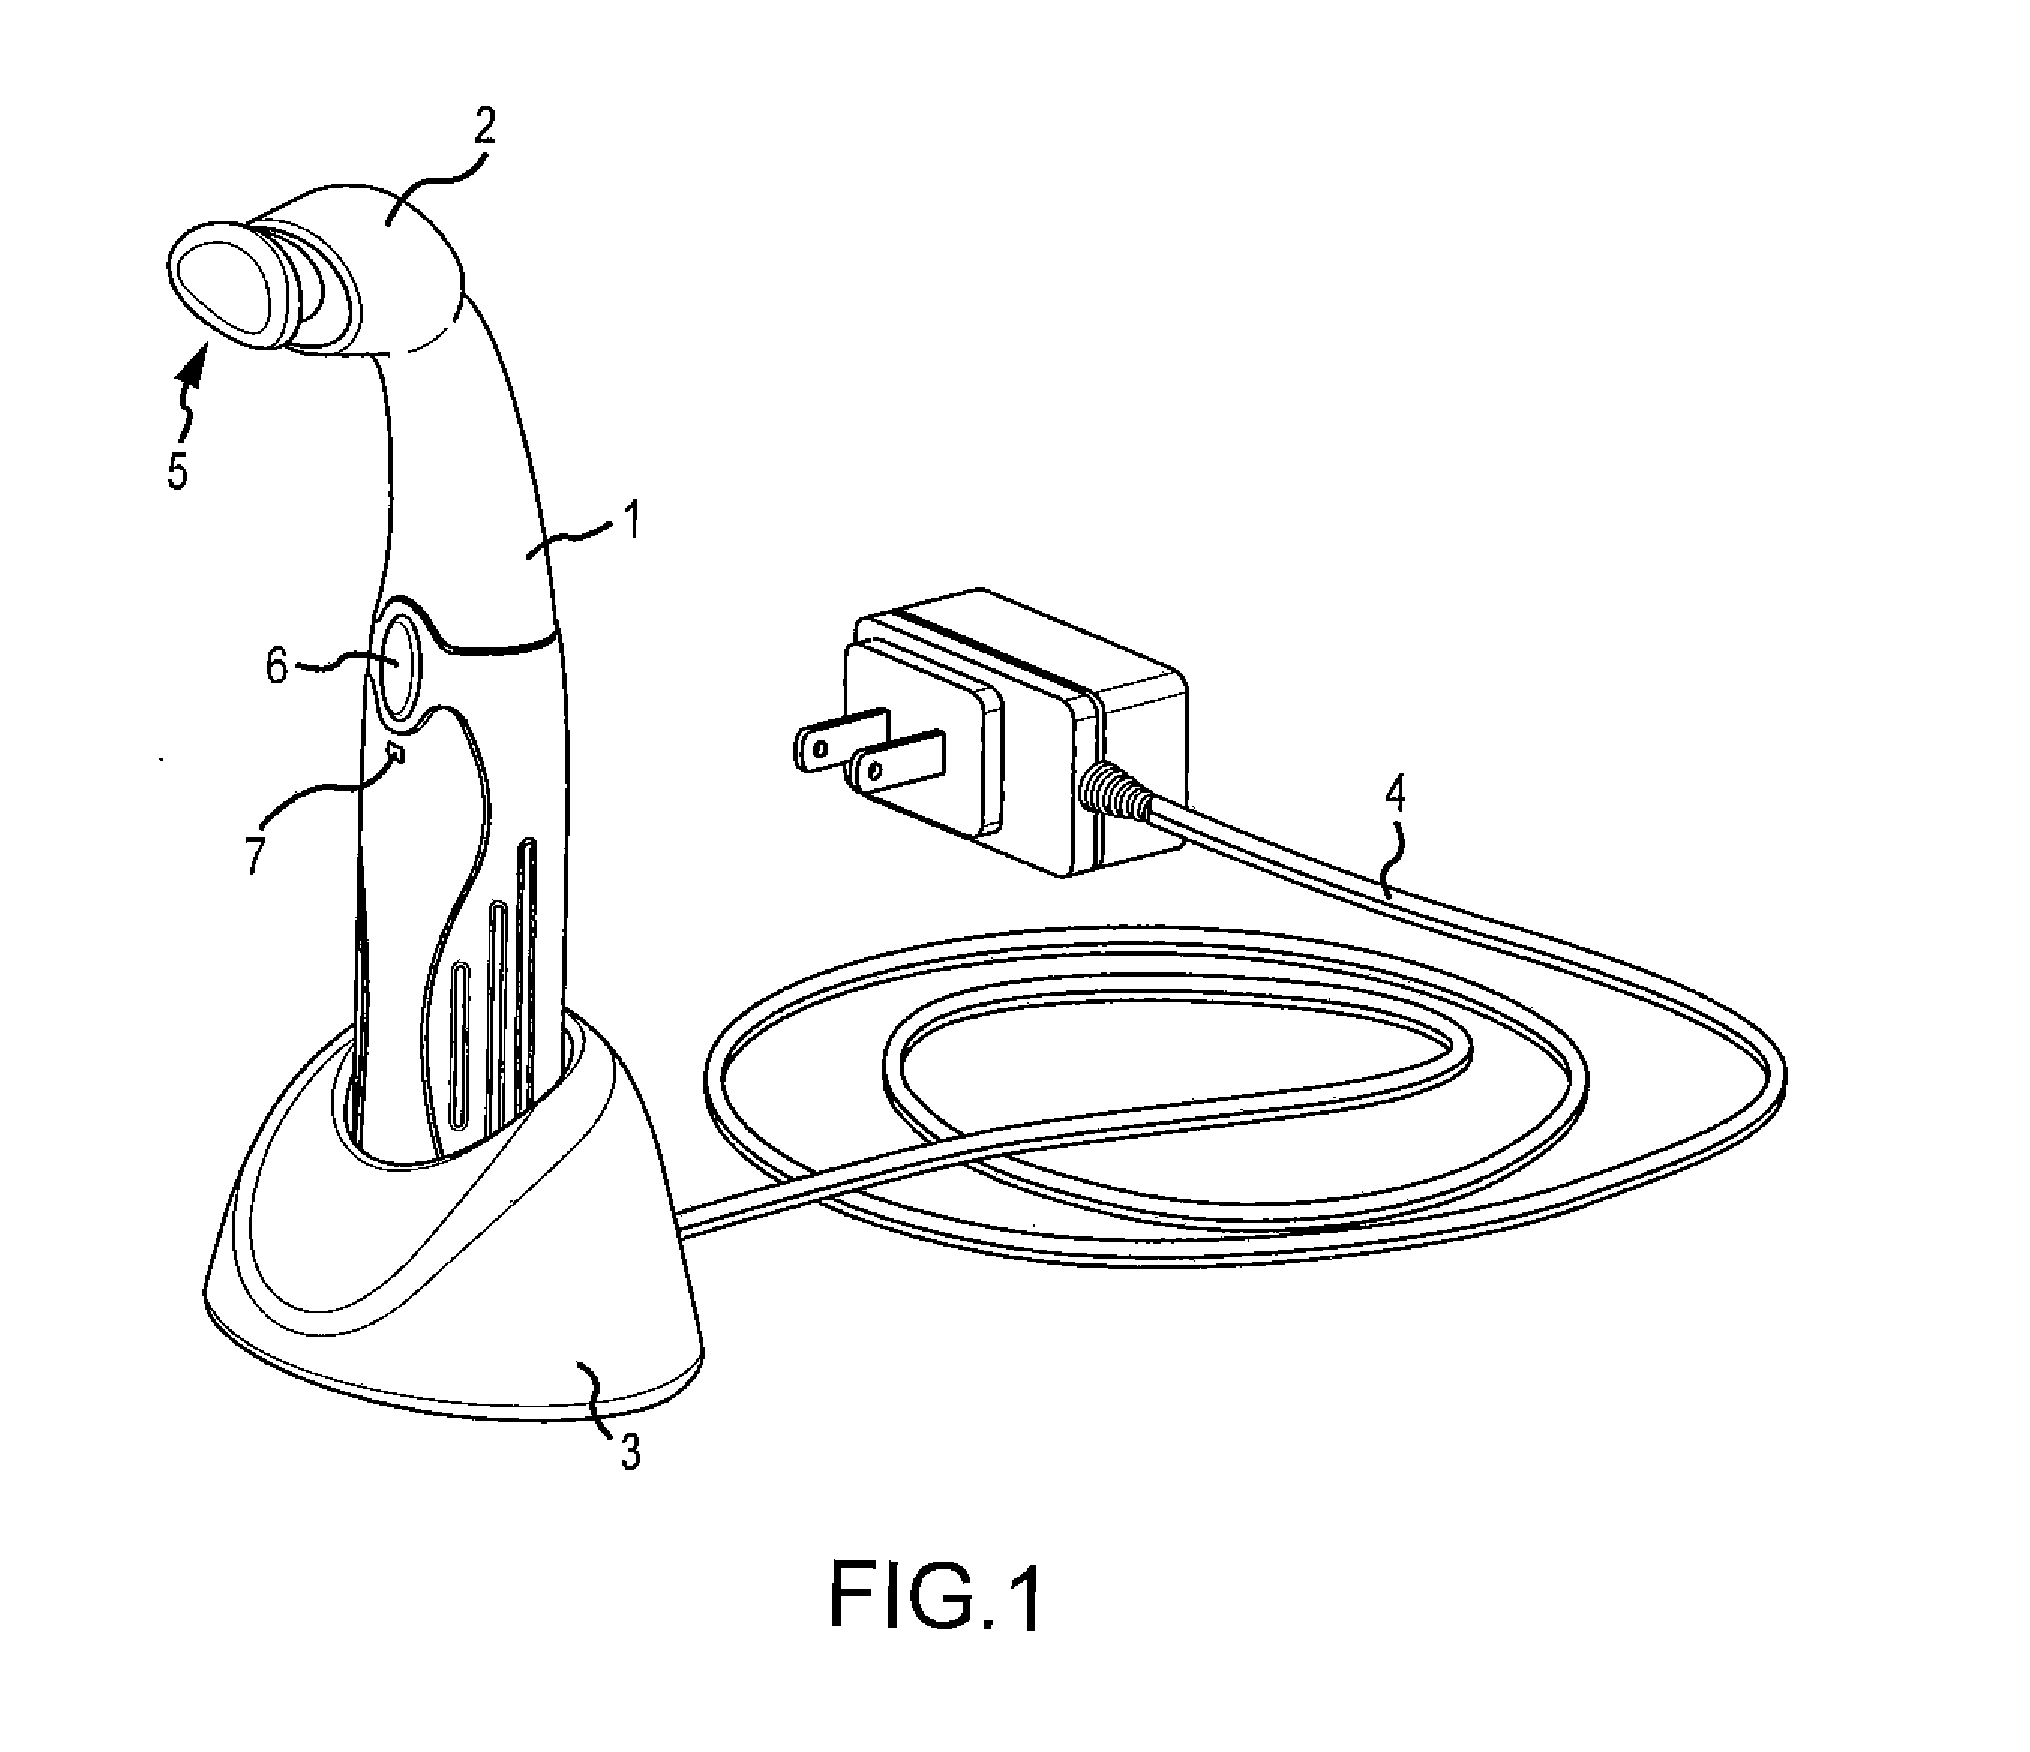 Device and method for stimulating the meibomian glands of the eyelid